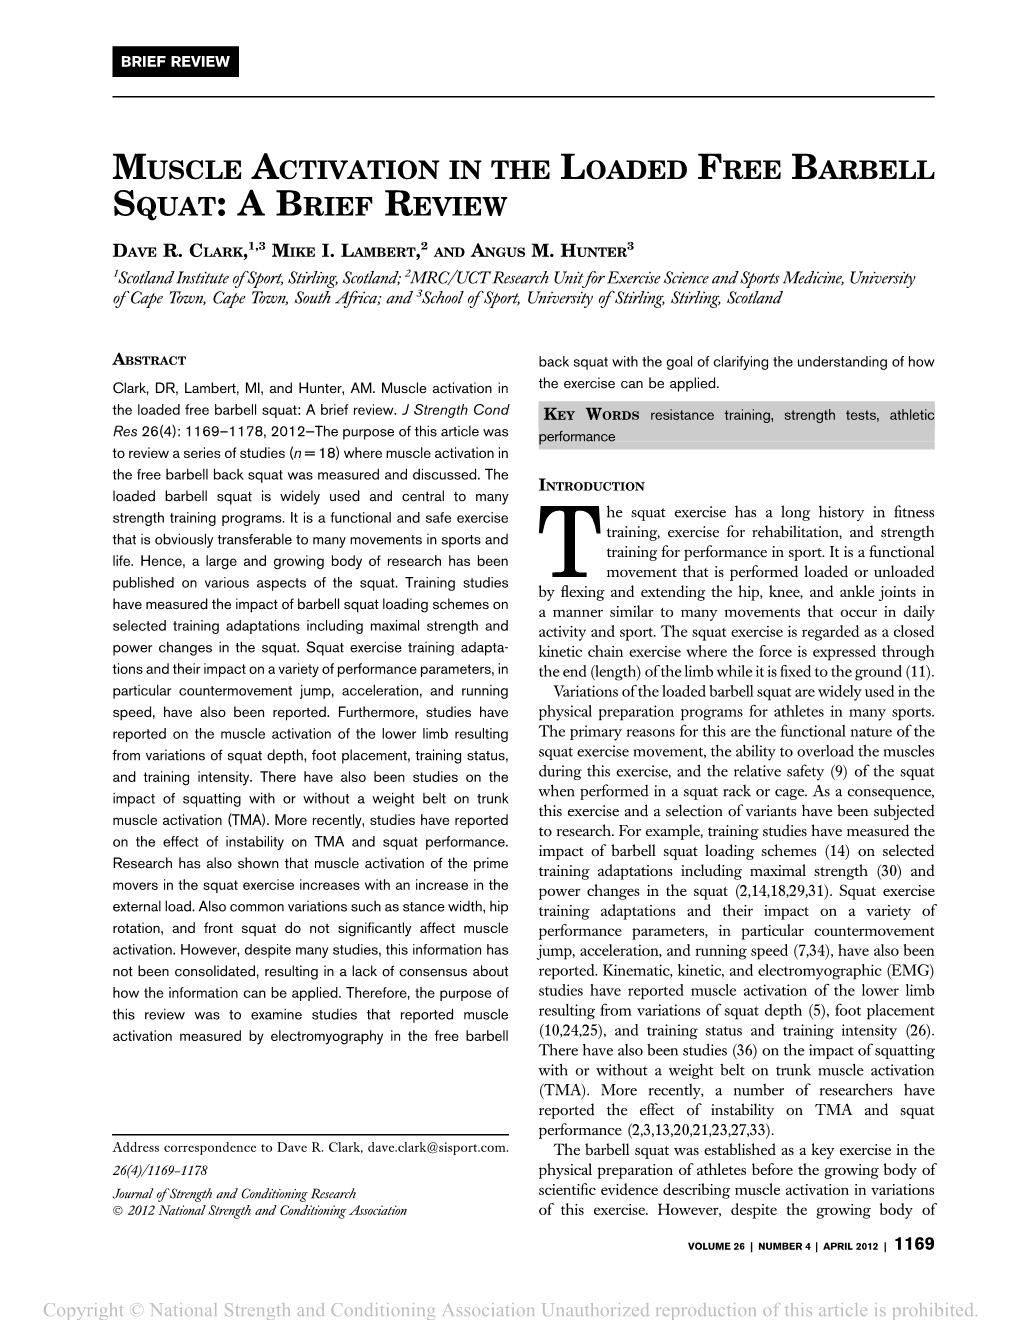 Muscle Activation in the Loaded Free Barbell Squat: Abrief Review